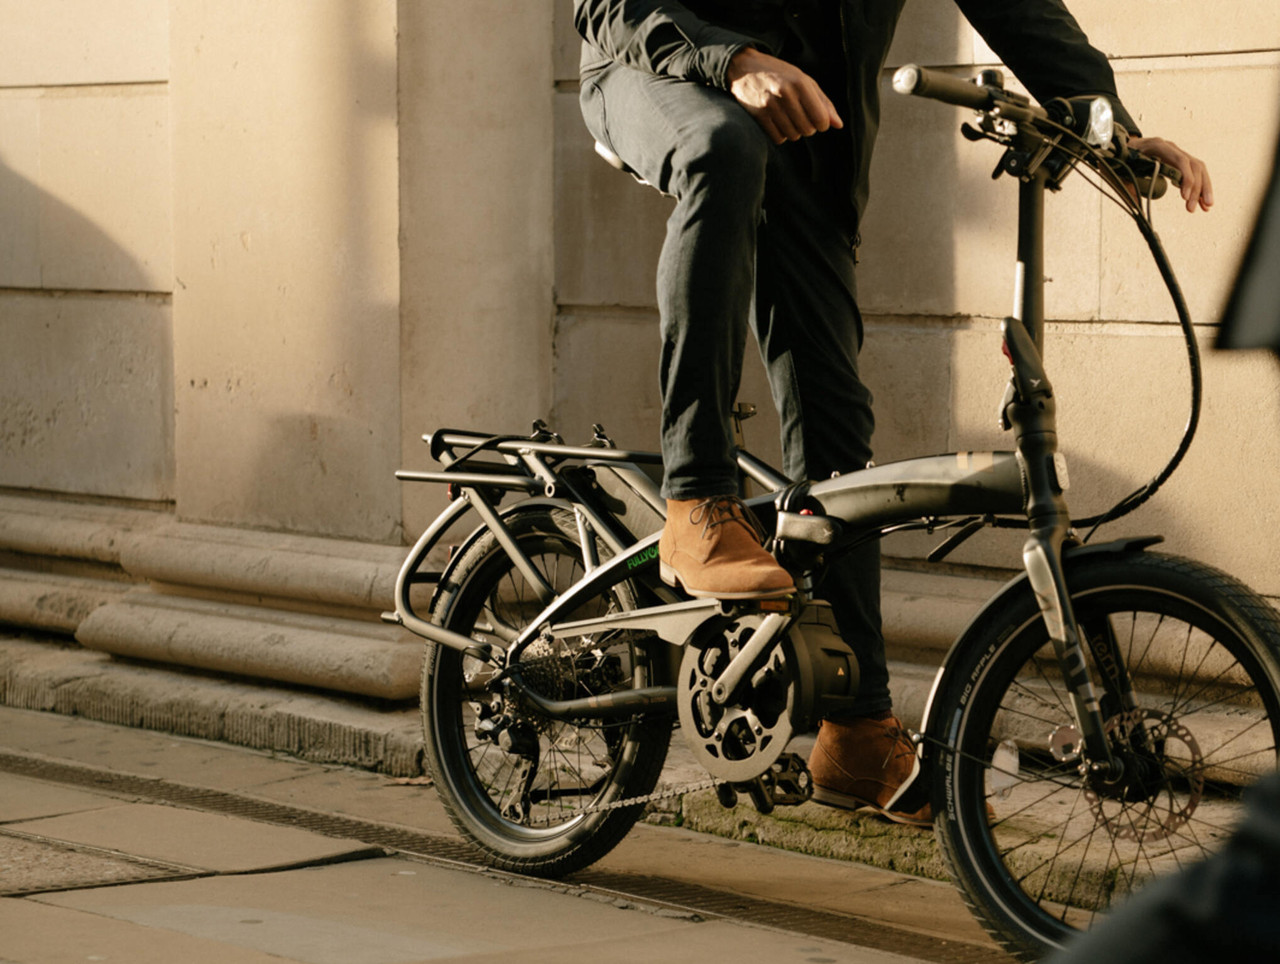 Why You Should Buy an E-bike Instead of an Electric Vehicle